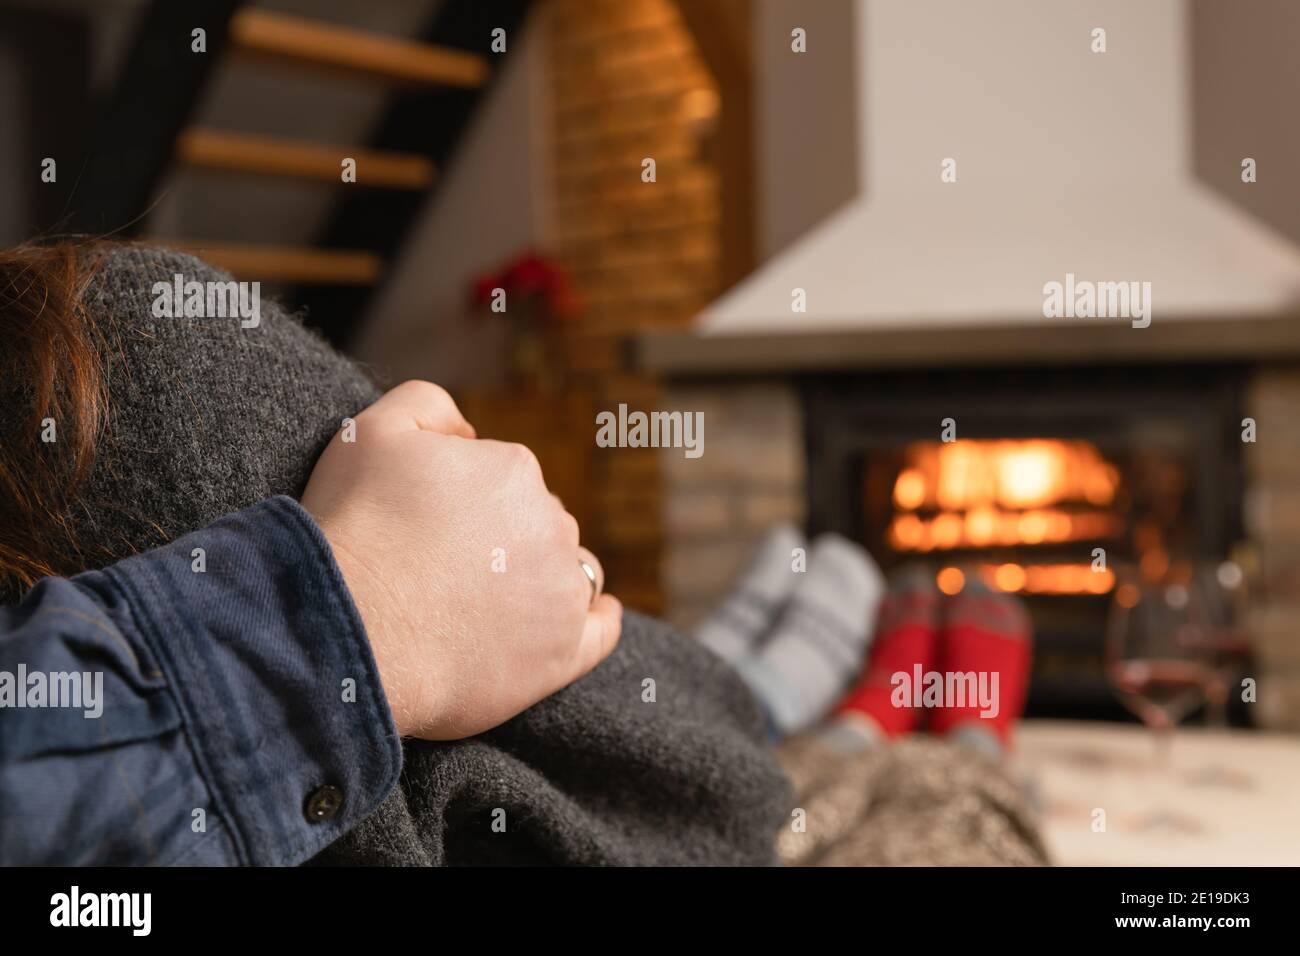 Couple in love sitting in a cozy room with fire place on a sofa with glass of wine. Family and love concept. Stock Photo